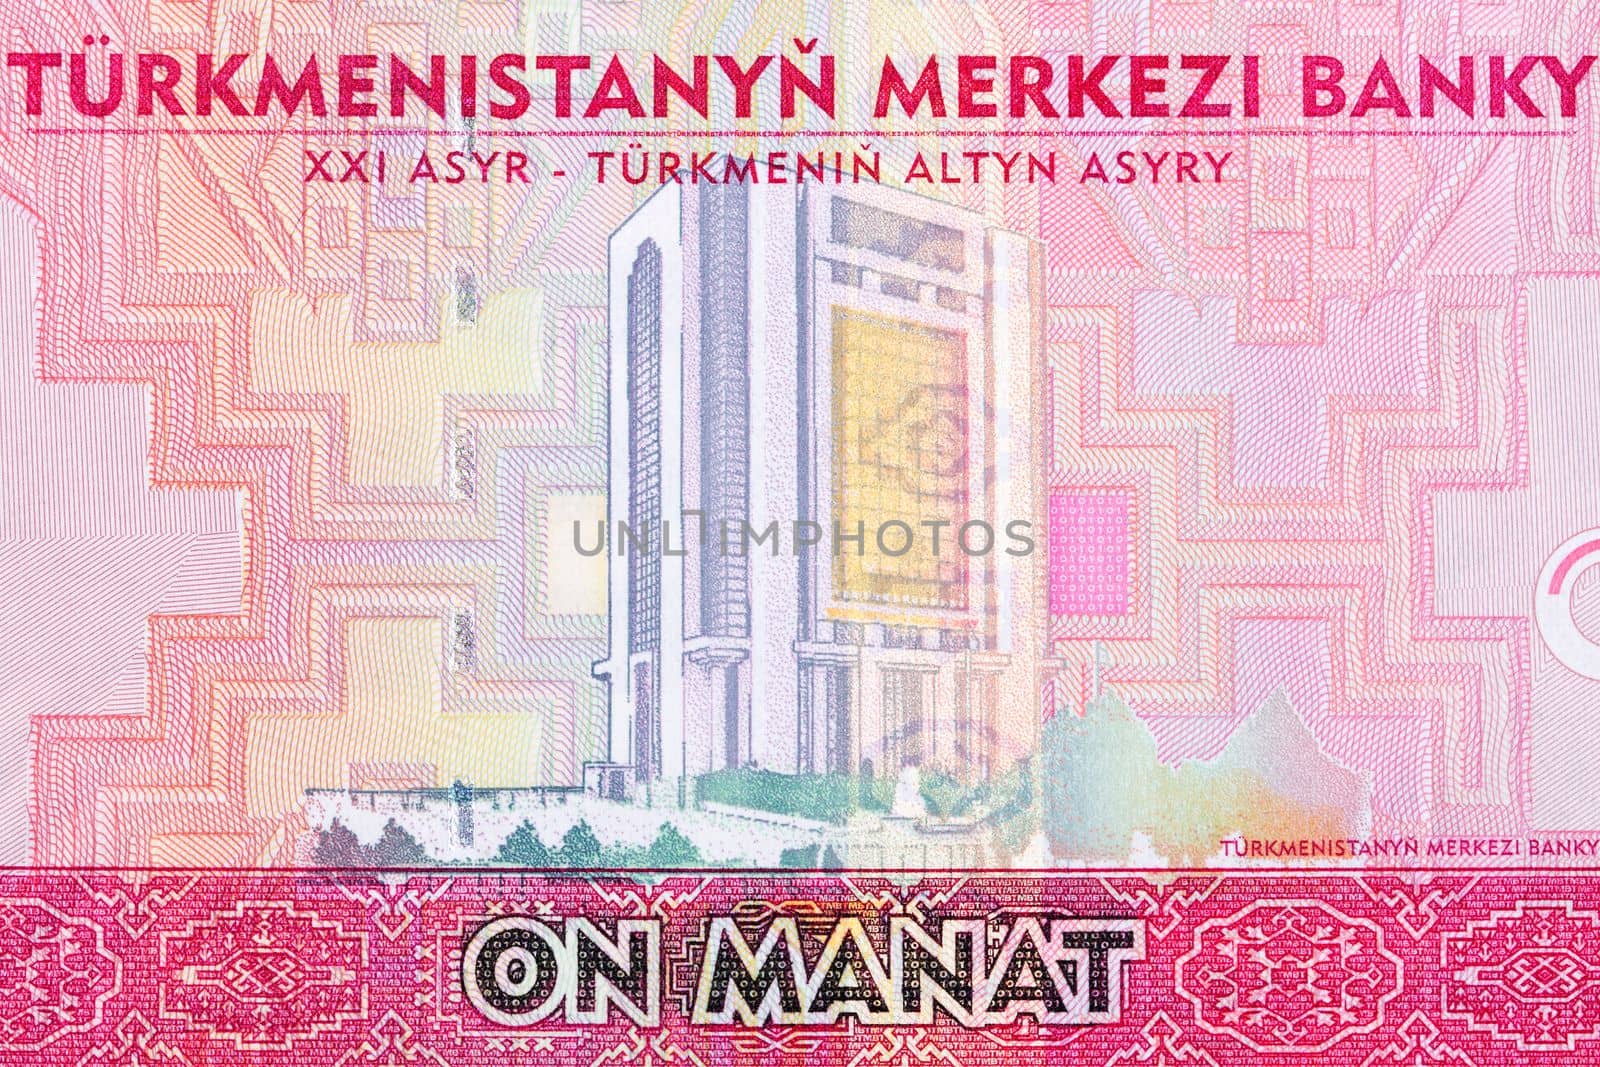 Central Bank of Turkmenistan from money by johan10